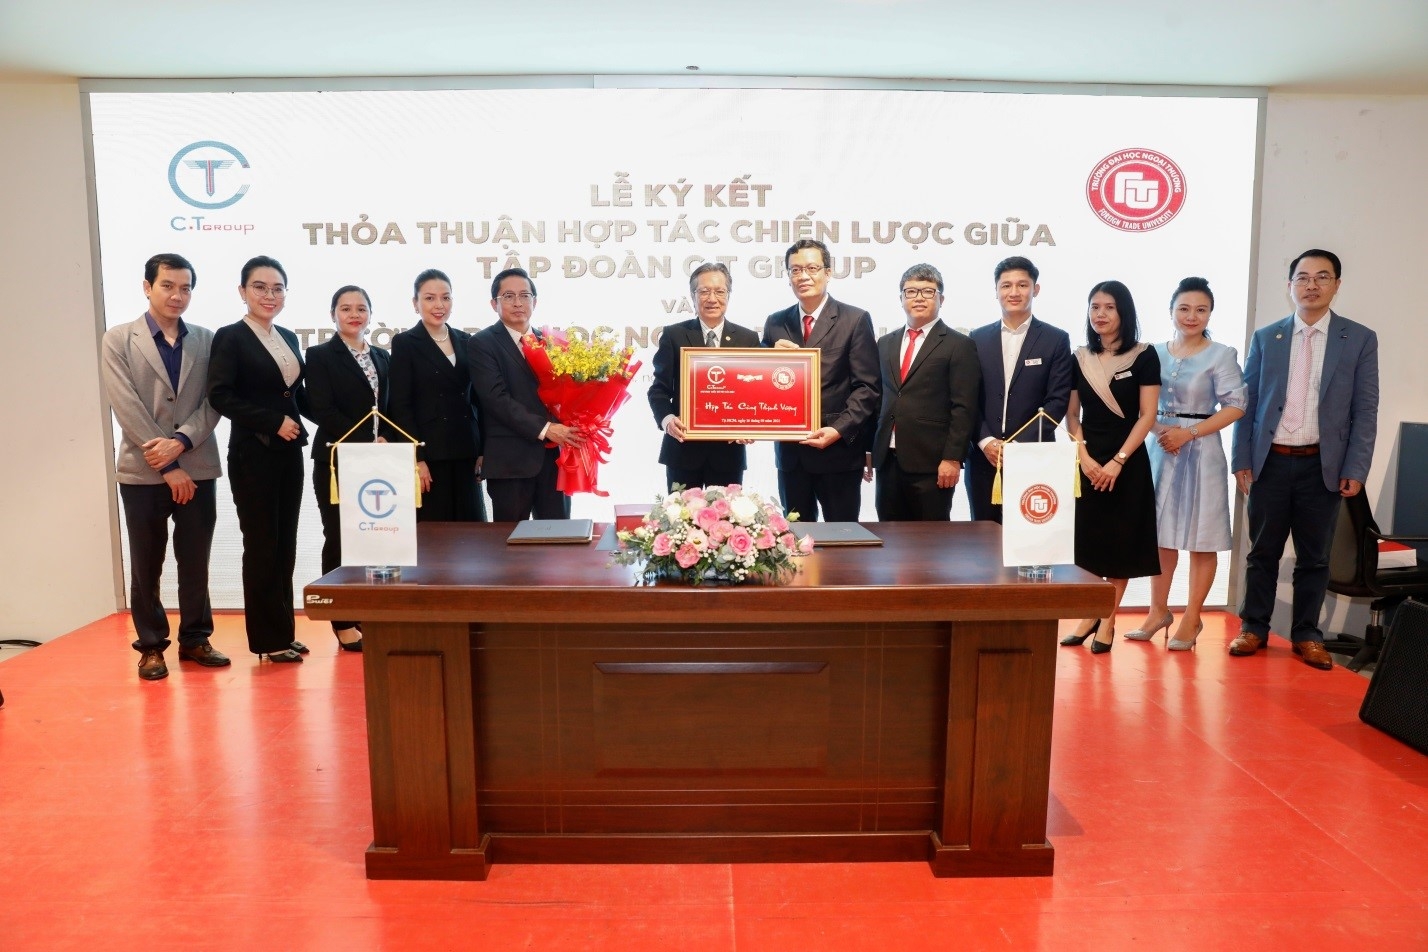 ct group signs comprehensive cooperation with foreign trade university